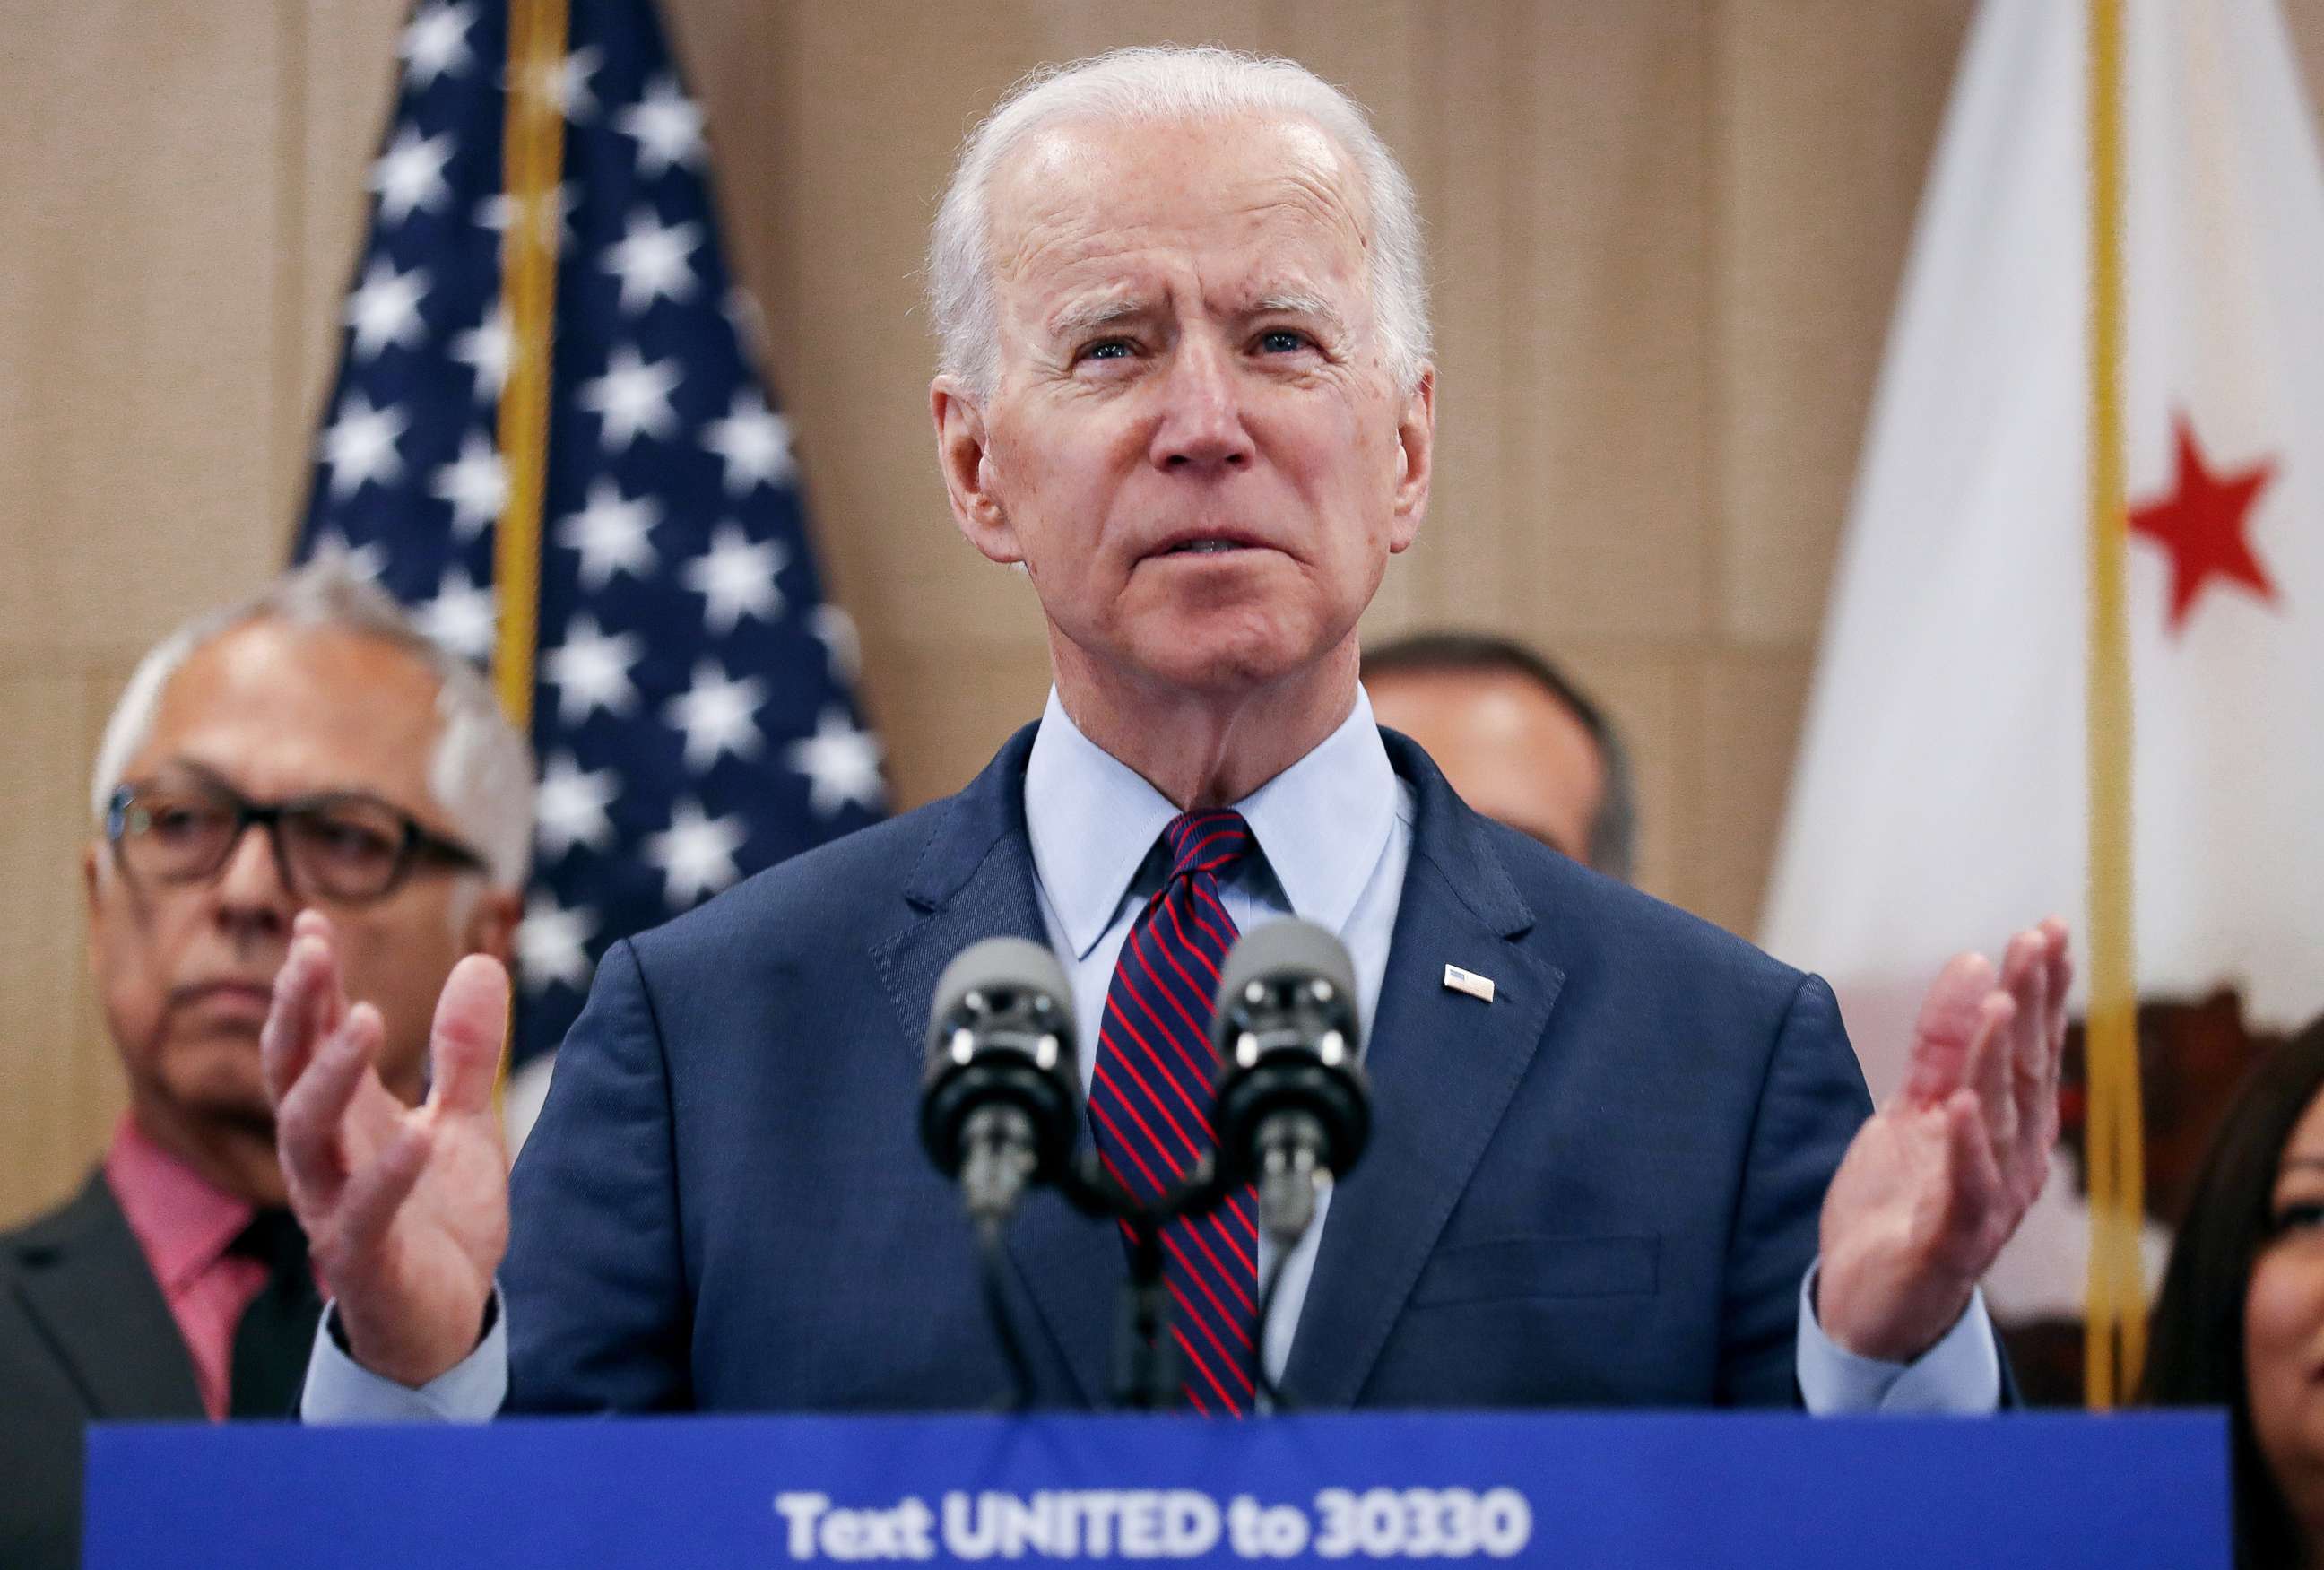 PHOTO: Democratic presidential candidate former Vice President Joe Biden speaks while standing with supporters at a campaign event at the W Los Angeles hotel, March 4, 2020, in Los Angeles.